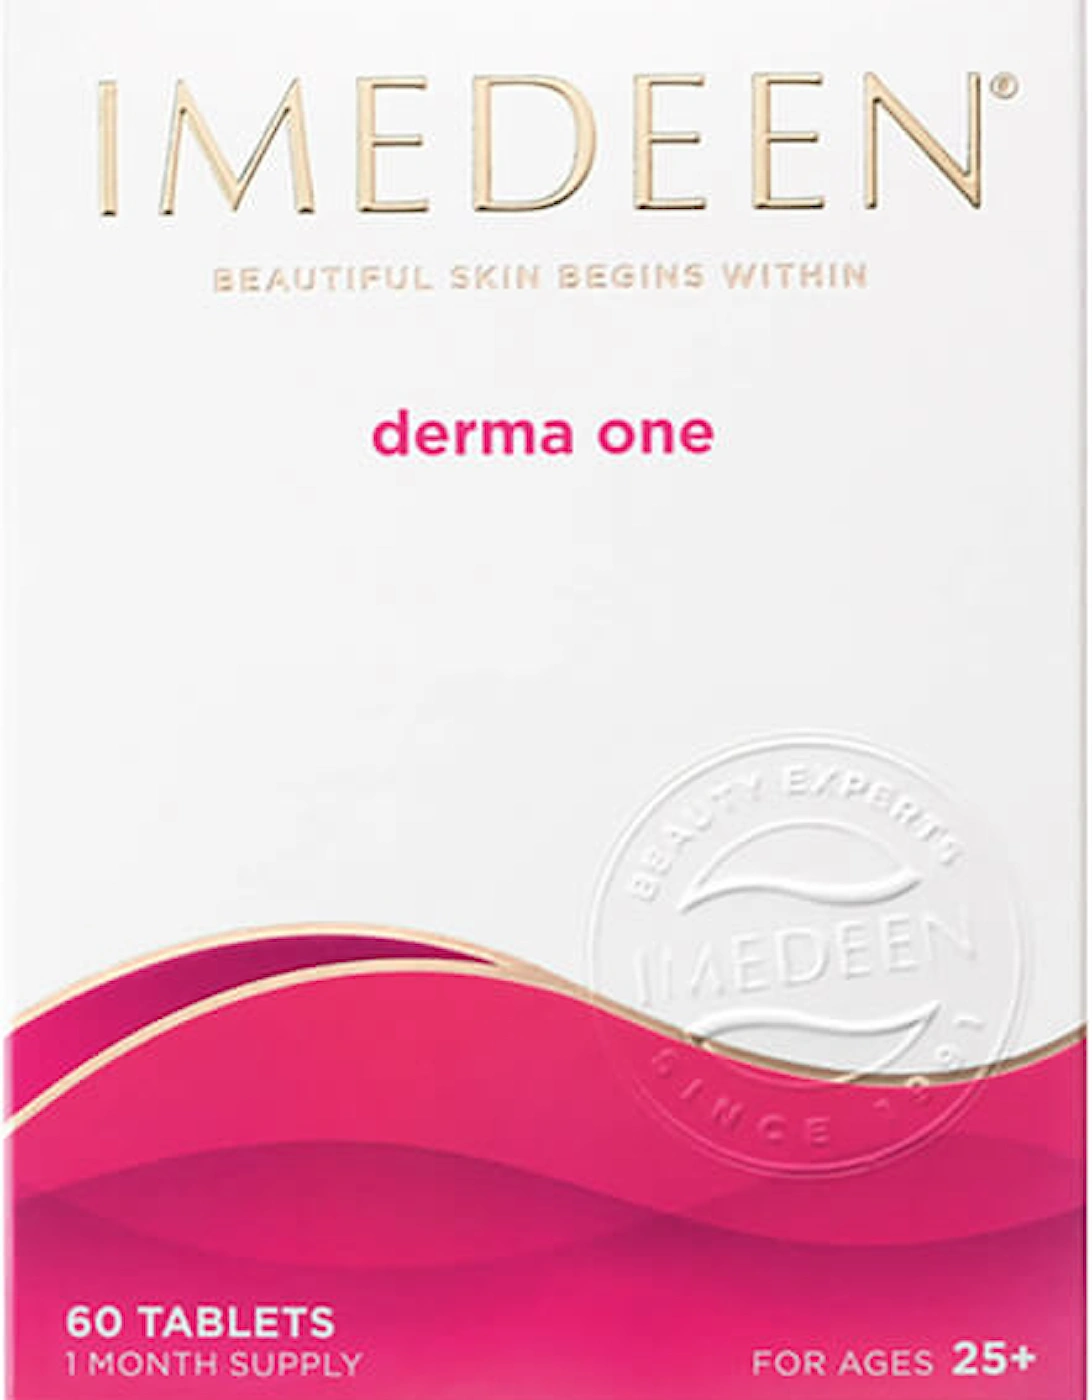 Derma One, Beauty & Skin Supplement for Women, contains Vitamin C and Zinc, 60 Tablets, Age 25+, 2 of 1